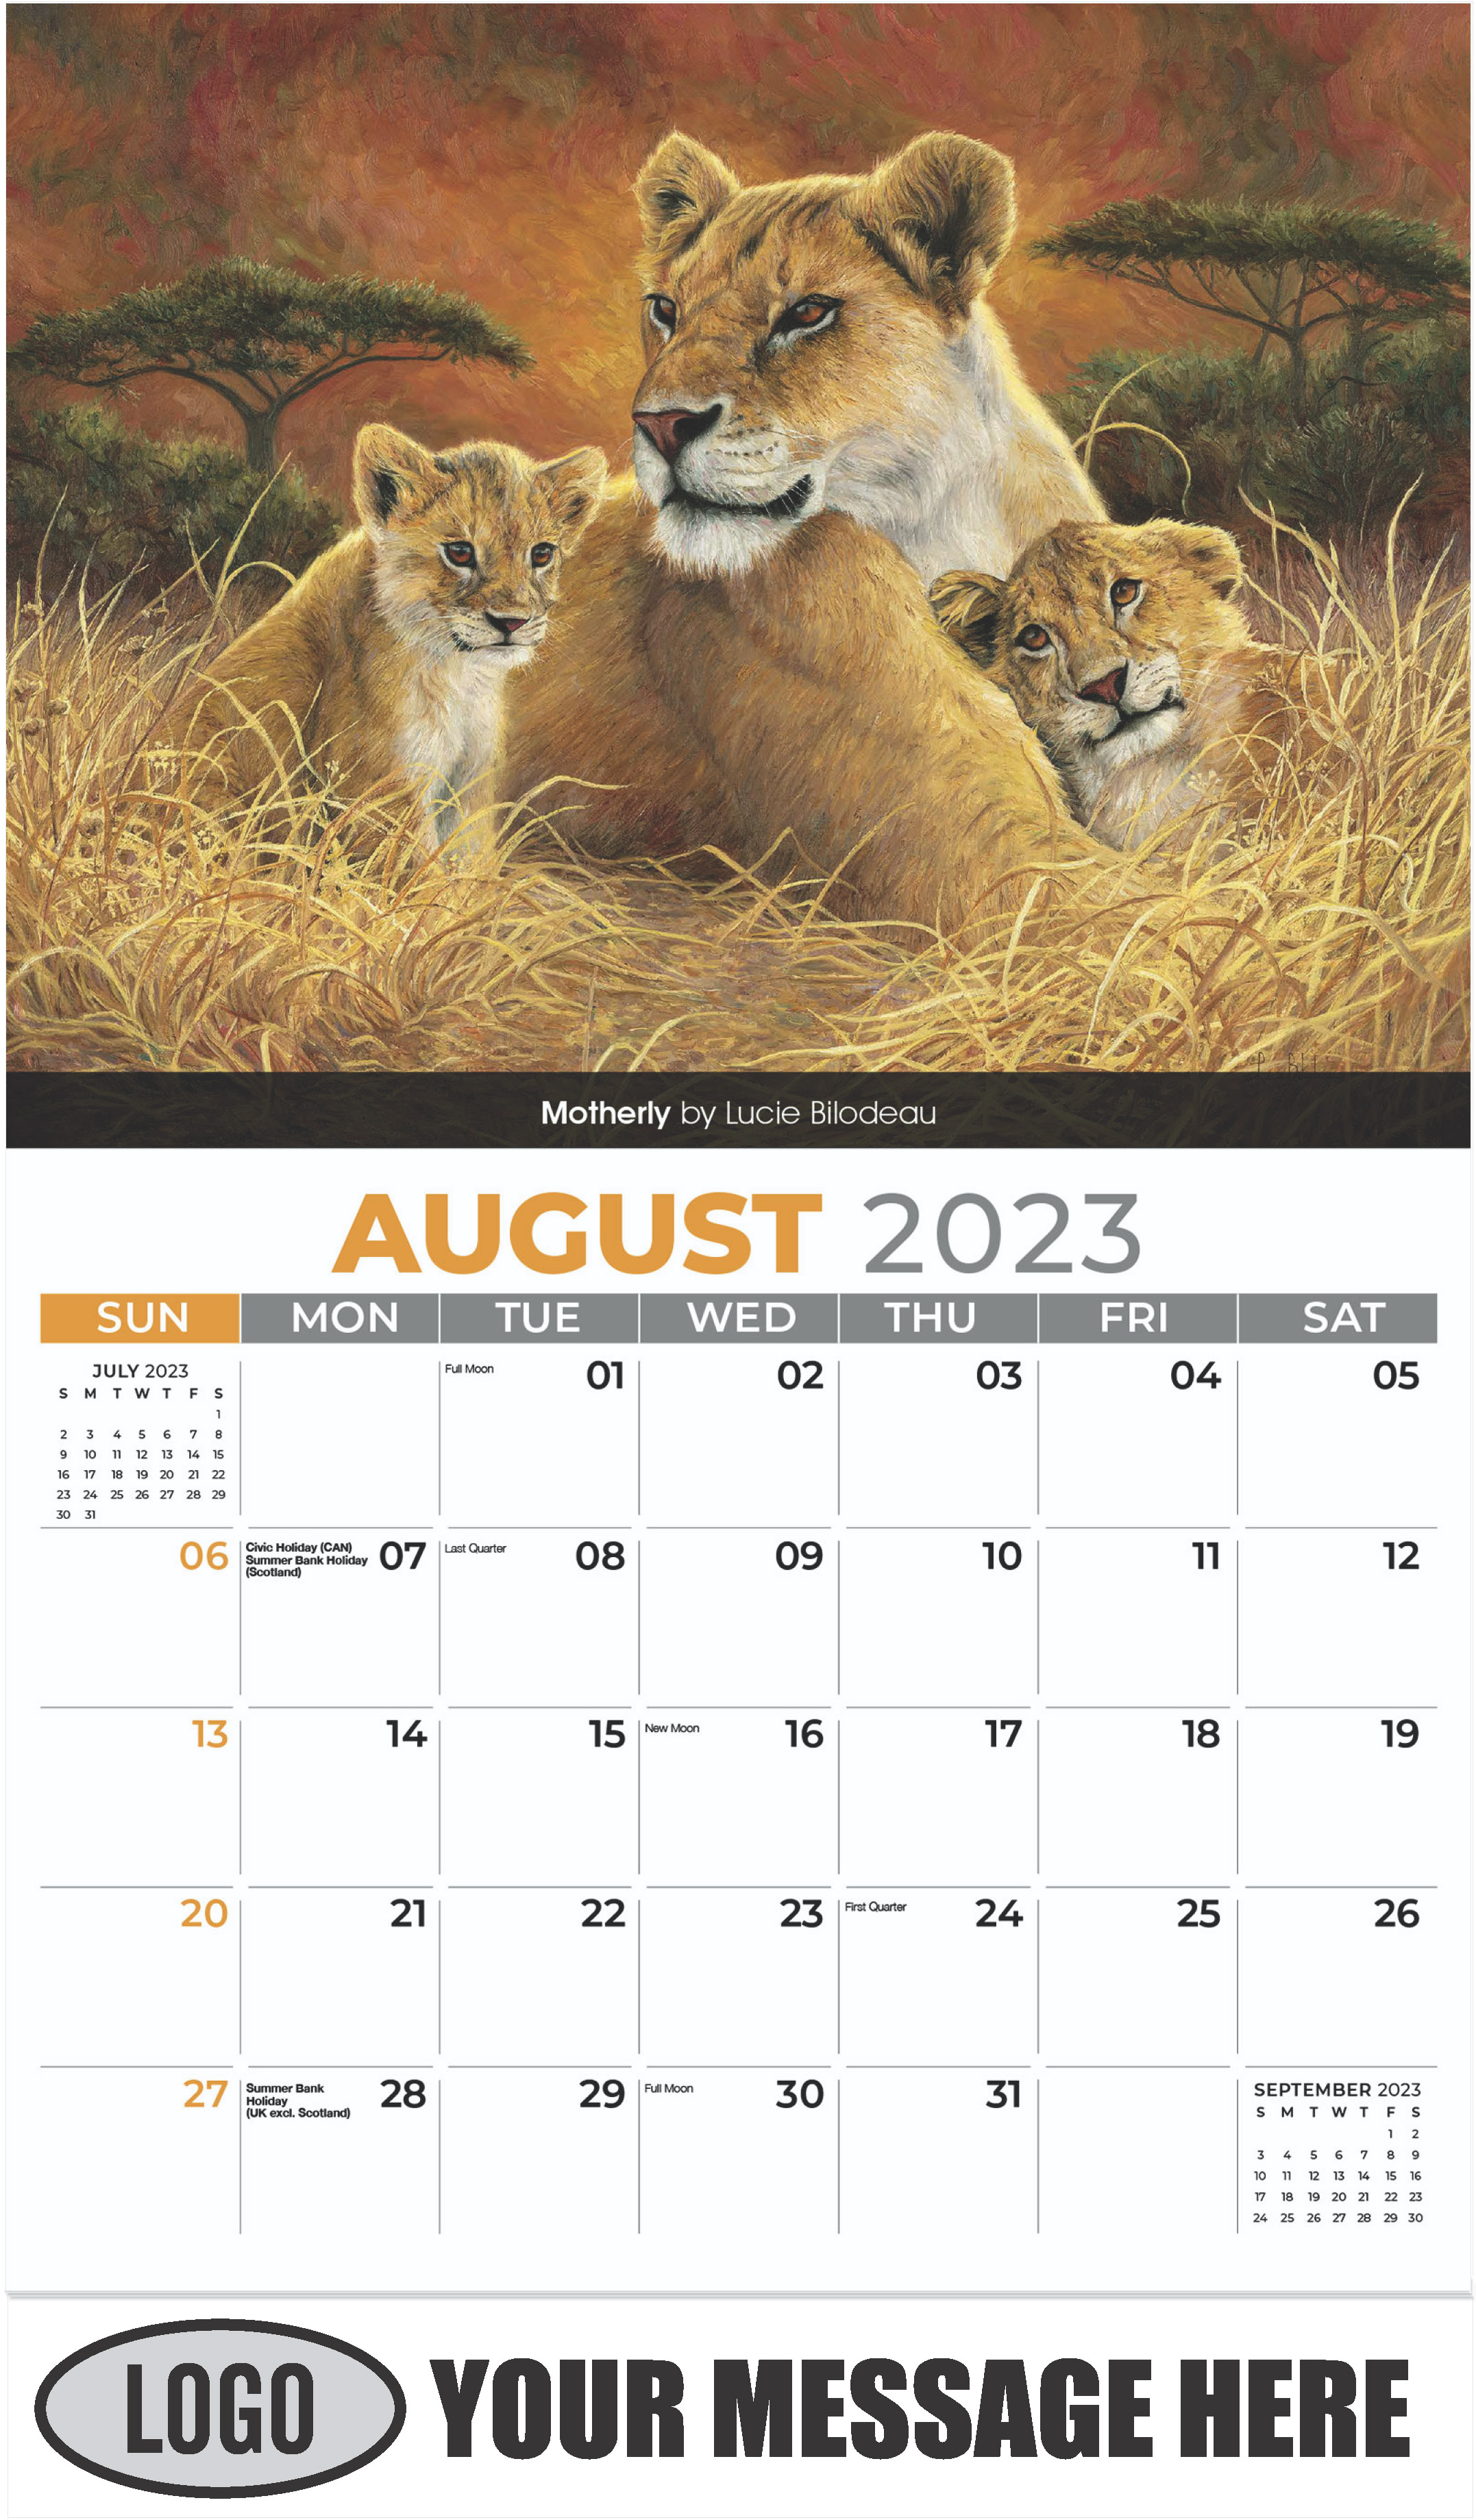 Motherly by Lucie Bilodeau - August - Wildlife Portraits 2023 Promotional Calendar